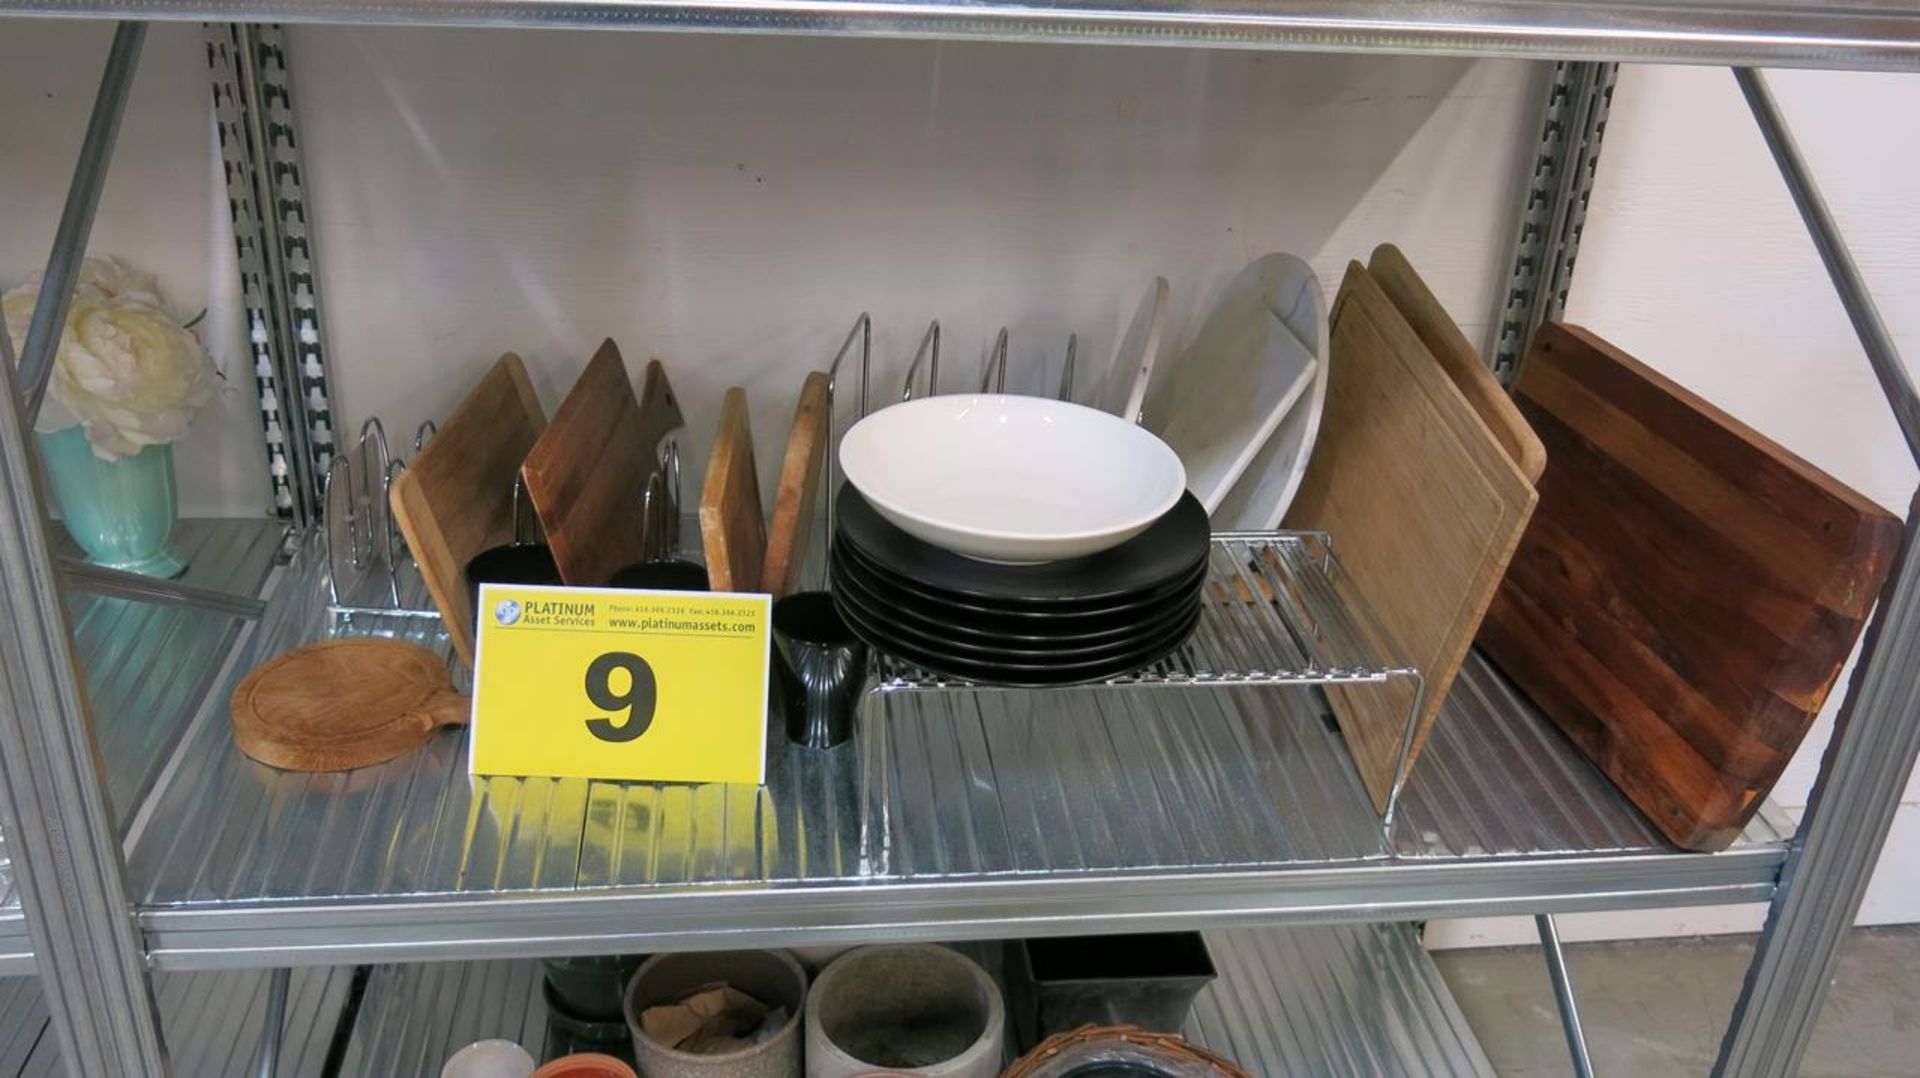 LOT OF PLATES AND WOOD CUTTING BOARDS